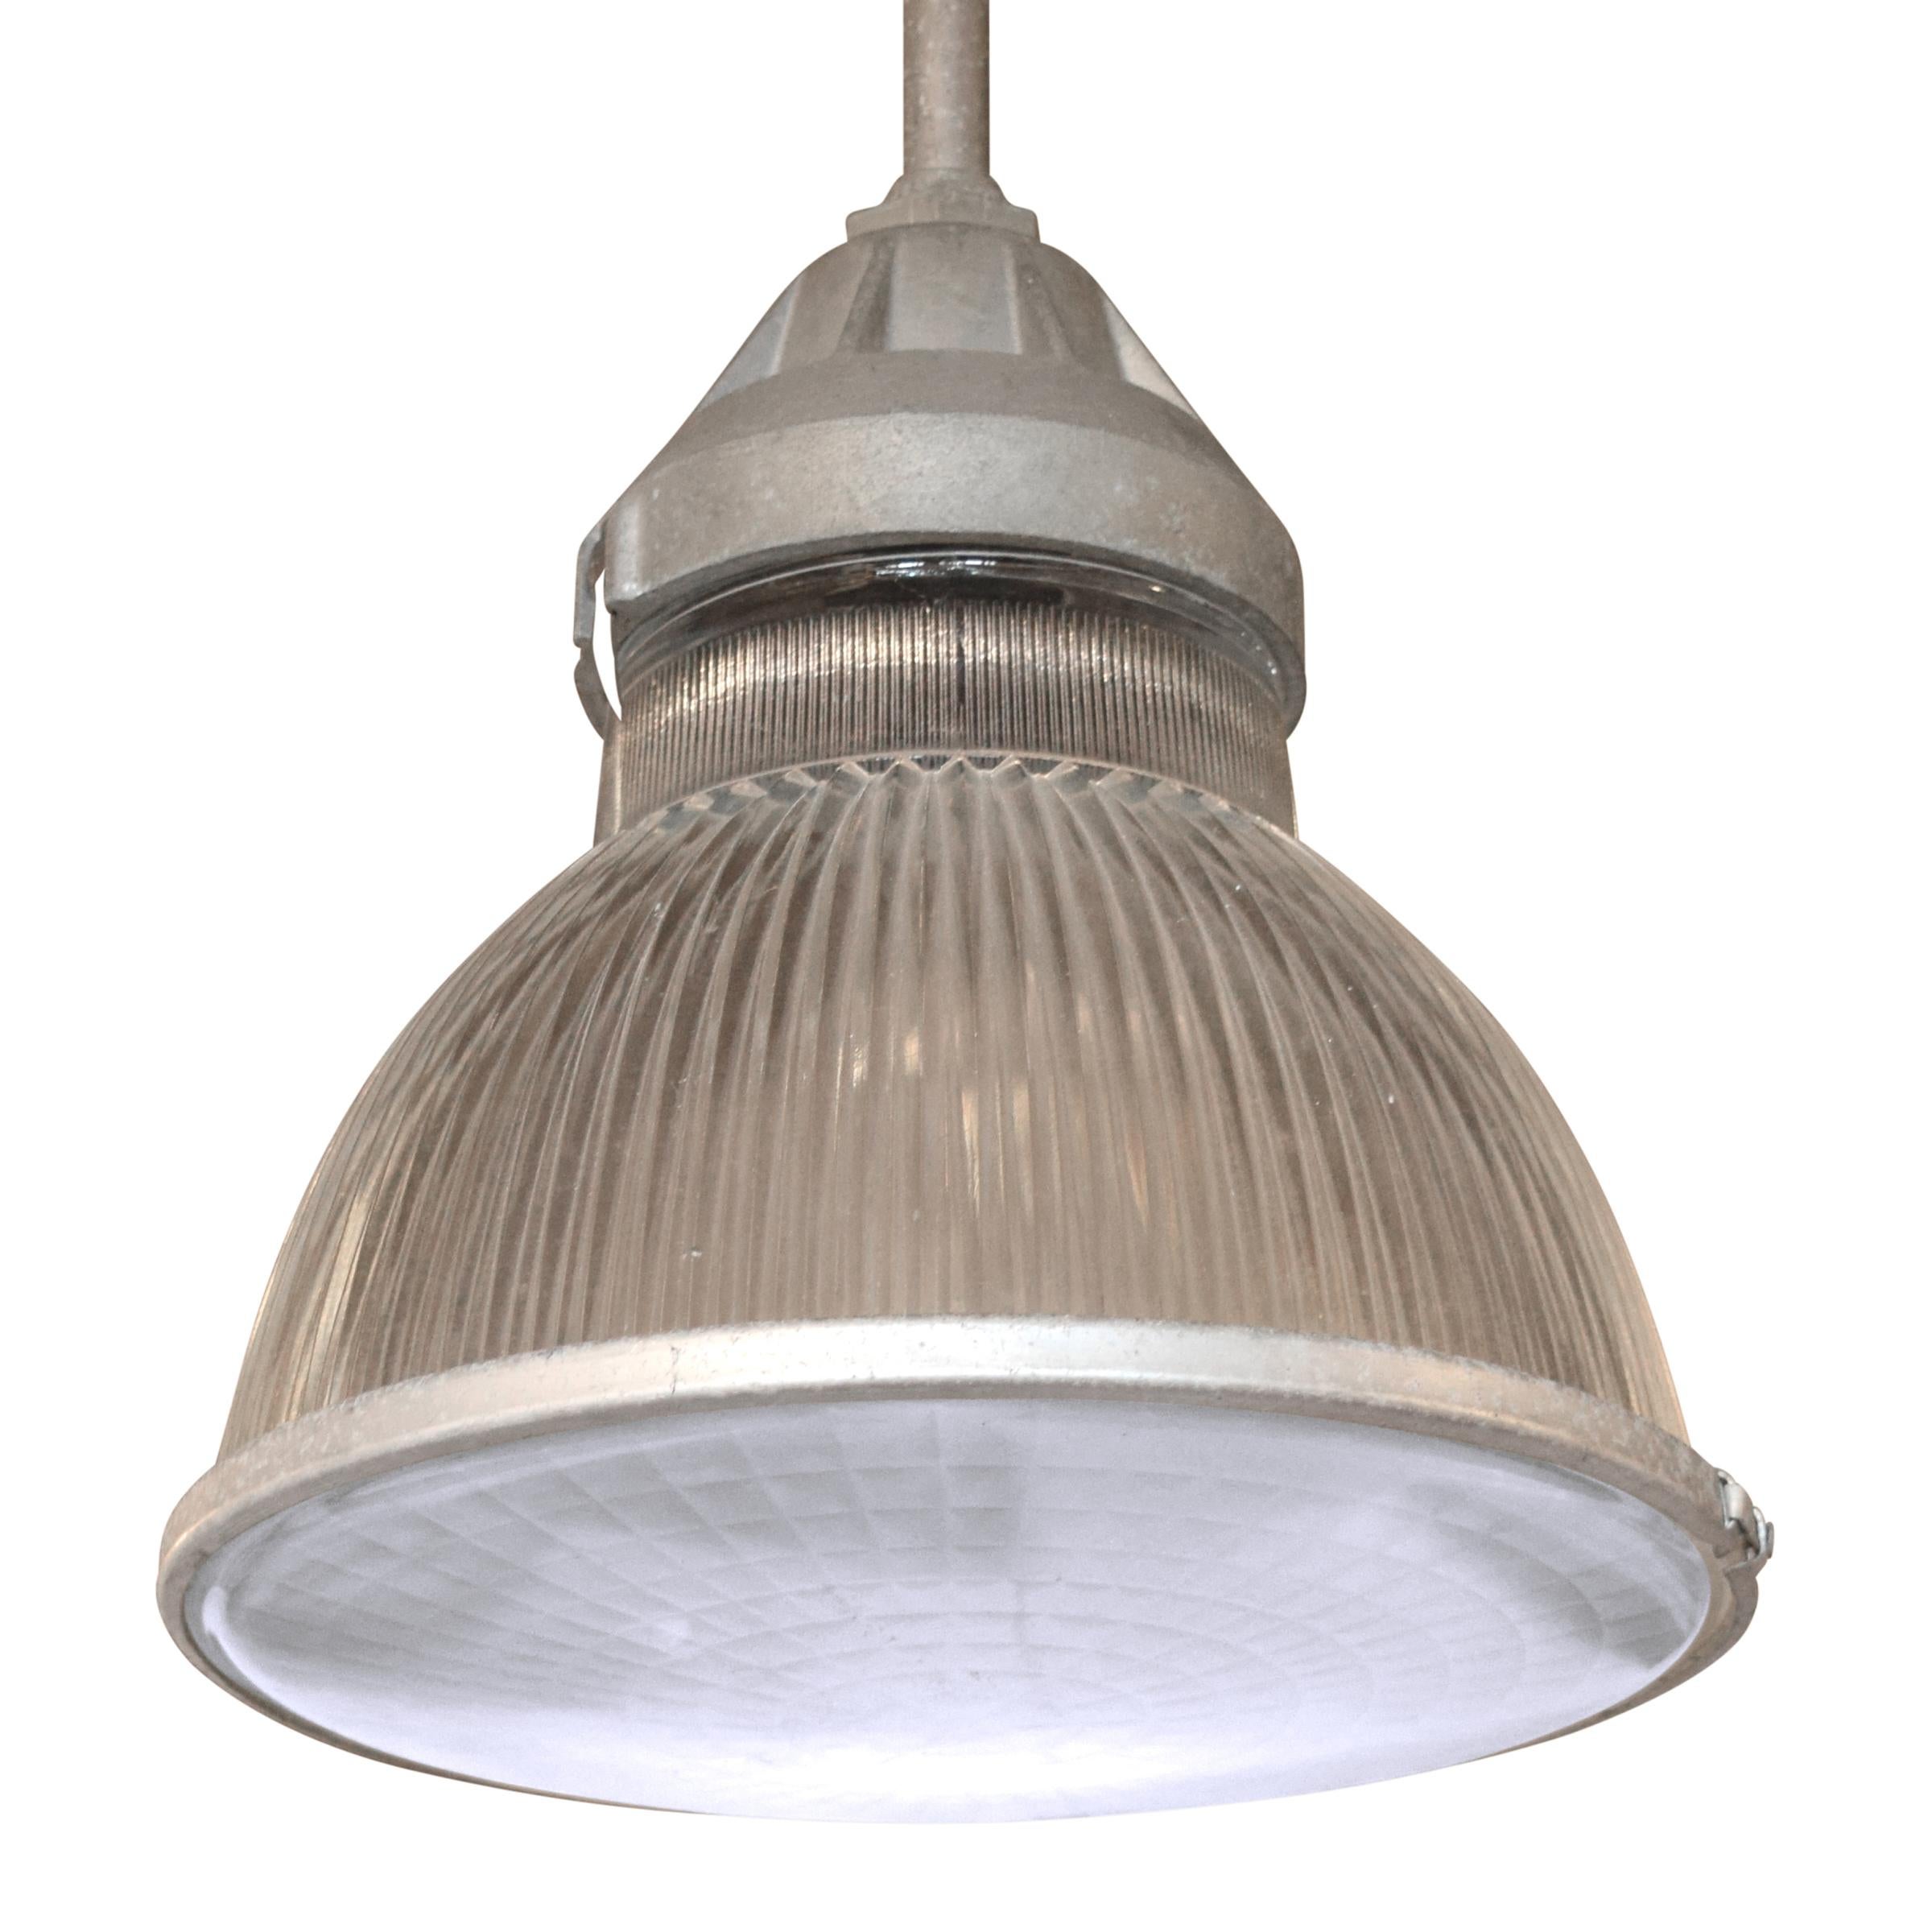 Early 20th century French holophane pendant light with an aluminium body. Multiple available.